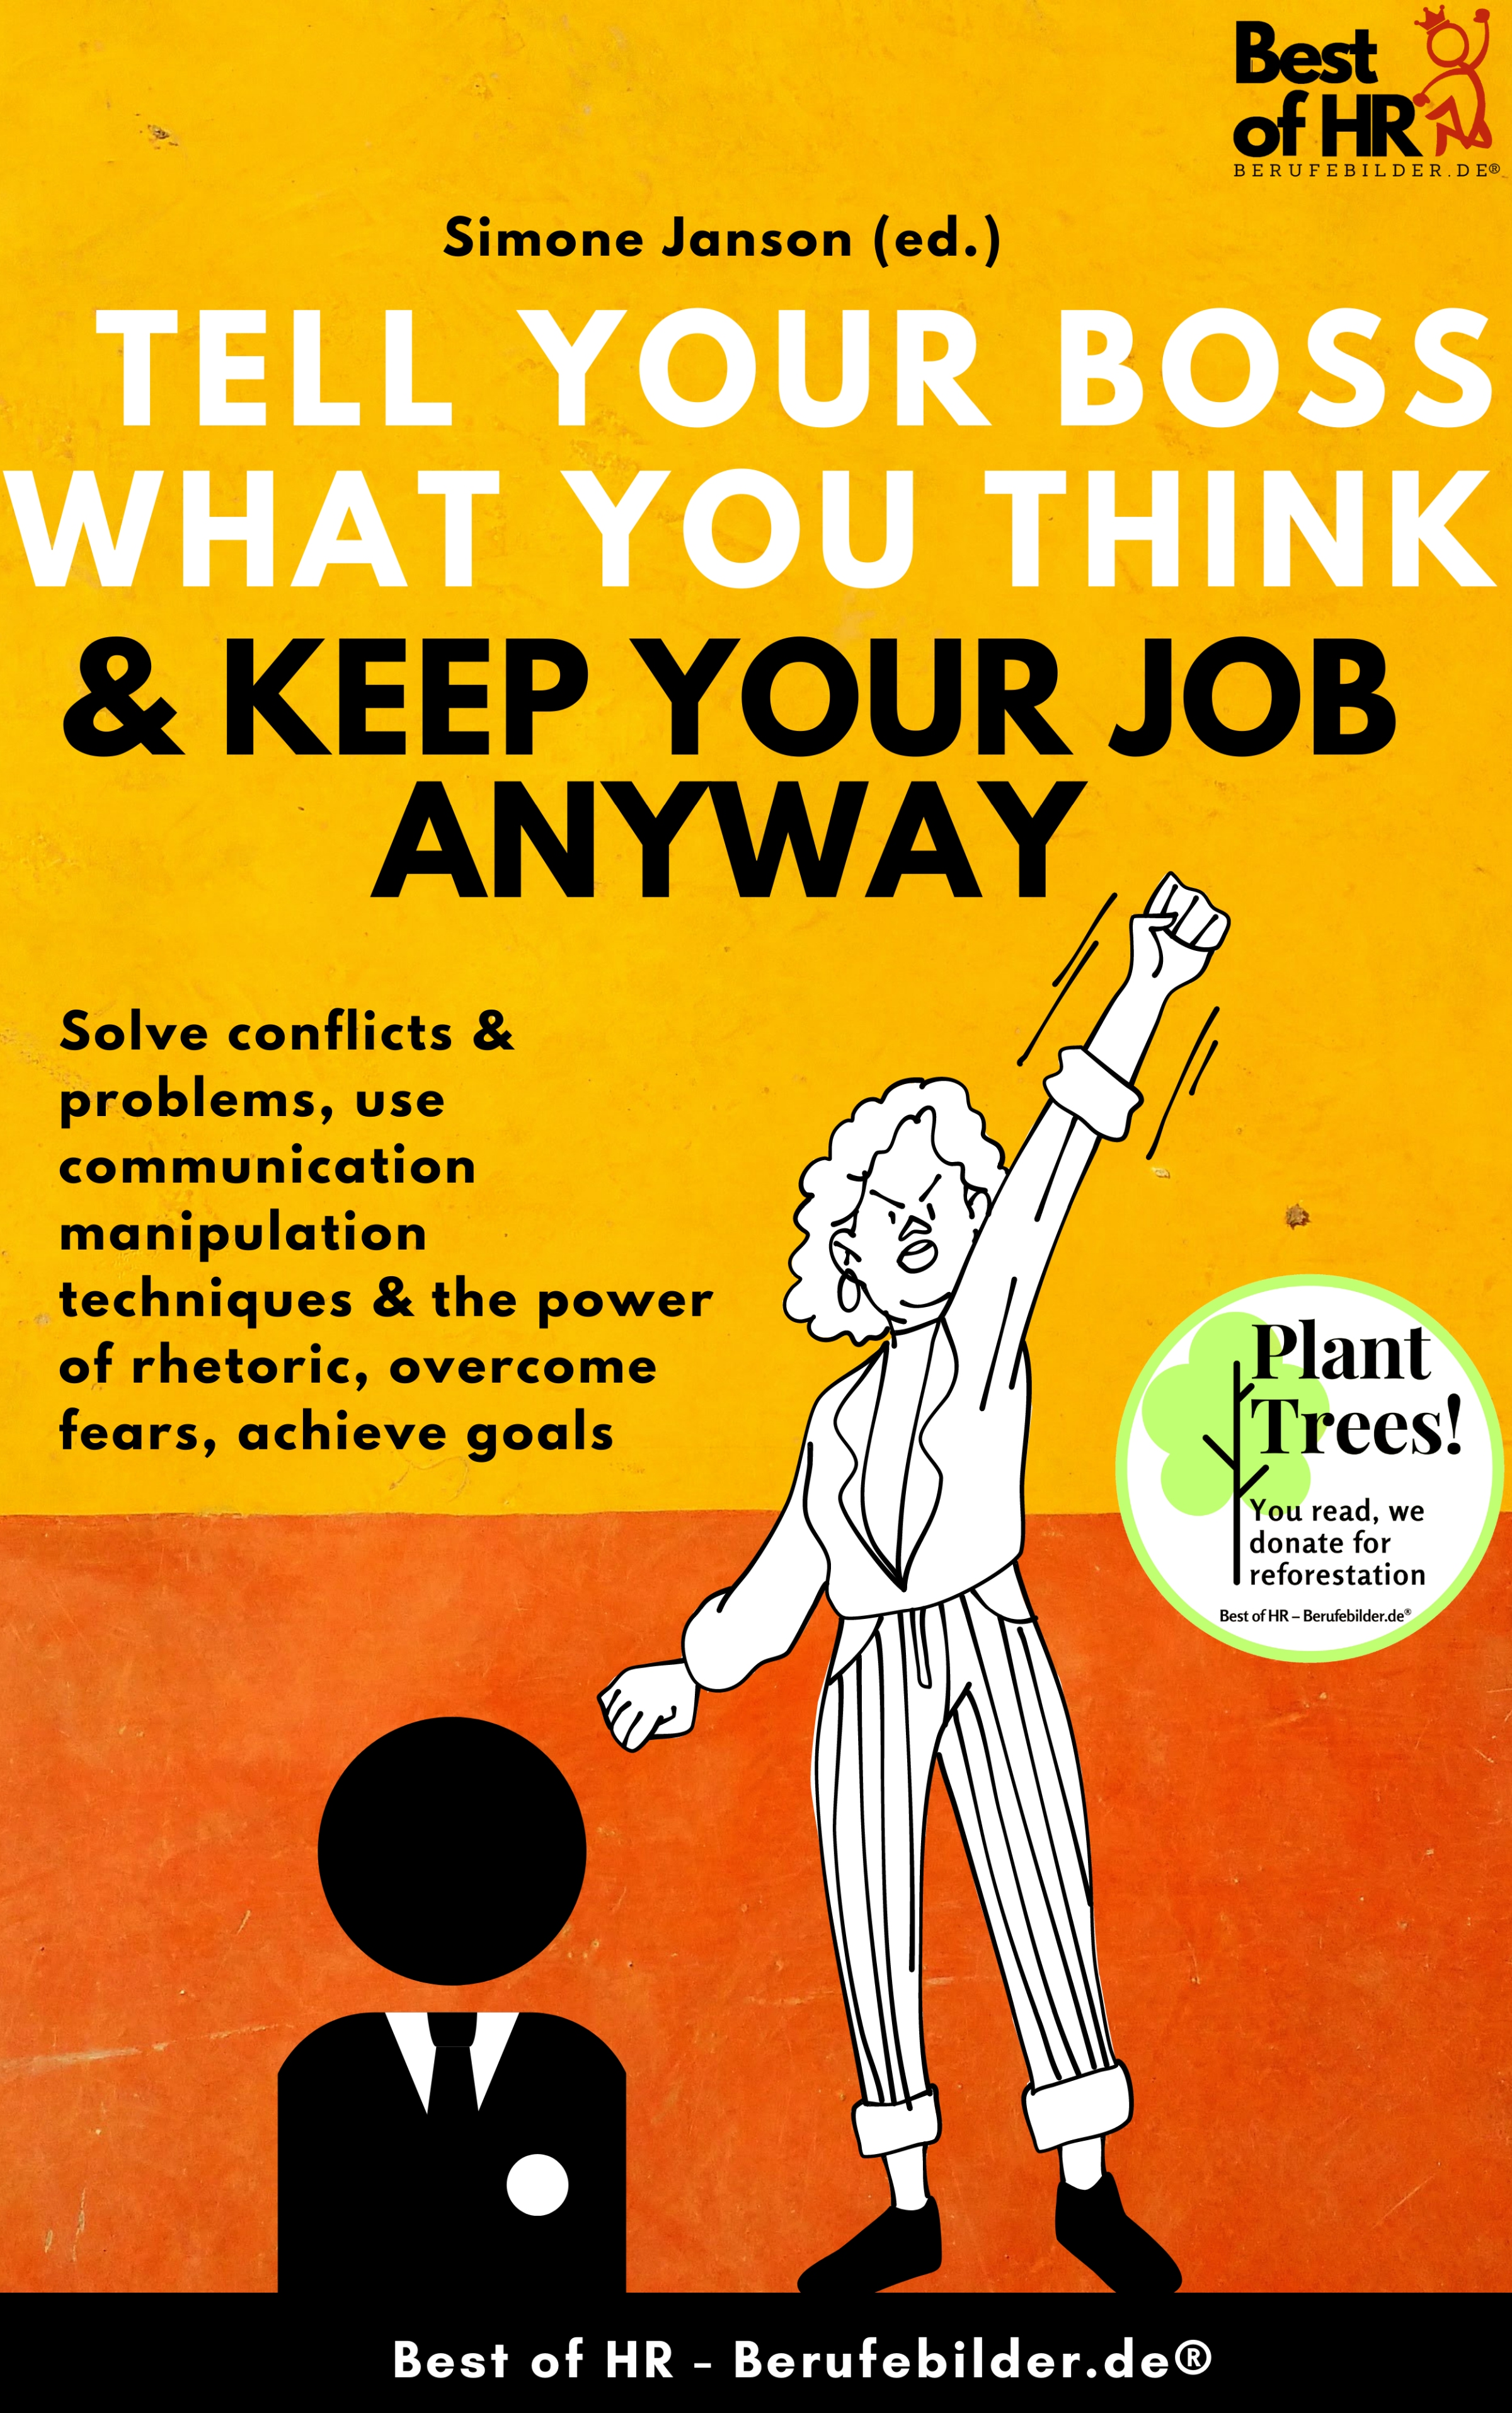 Tell Your Boss What You Think & Keep Your Job Anyway